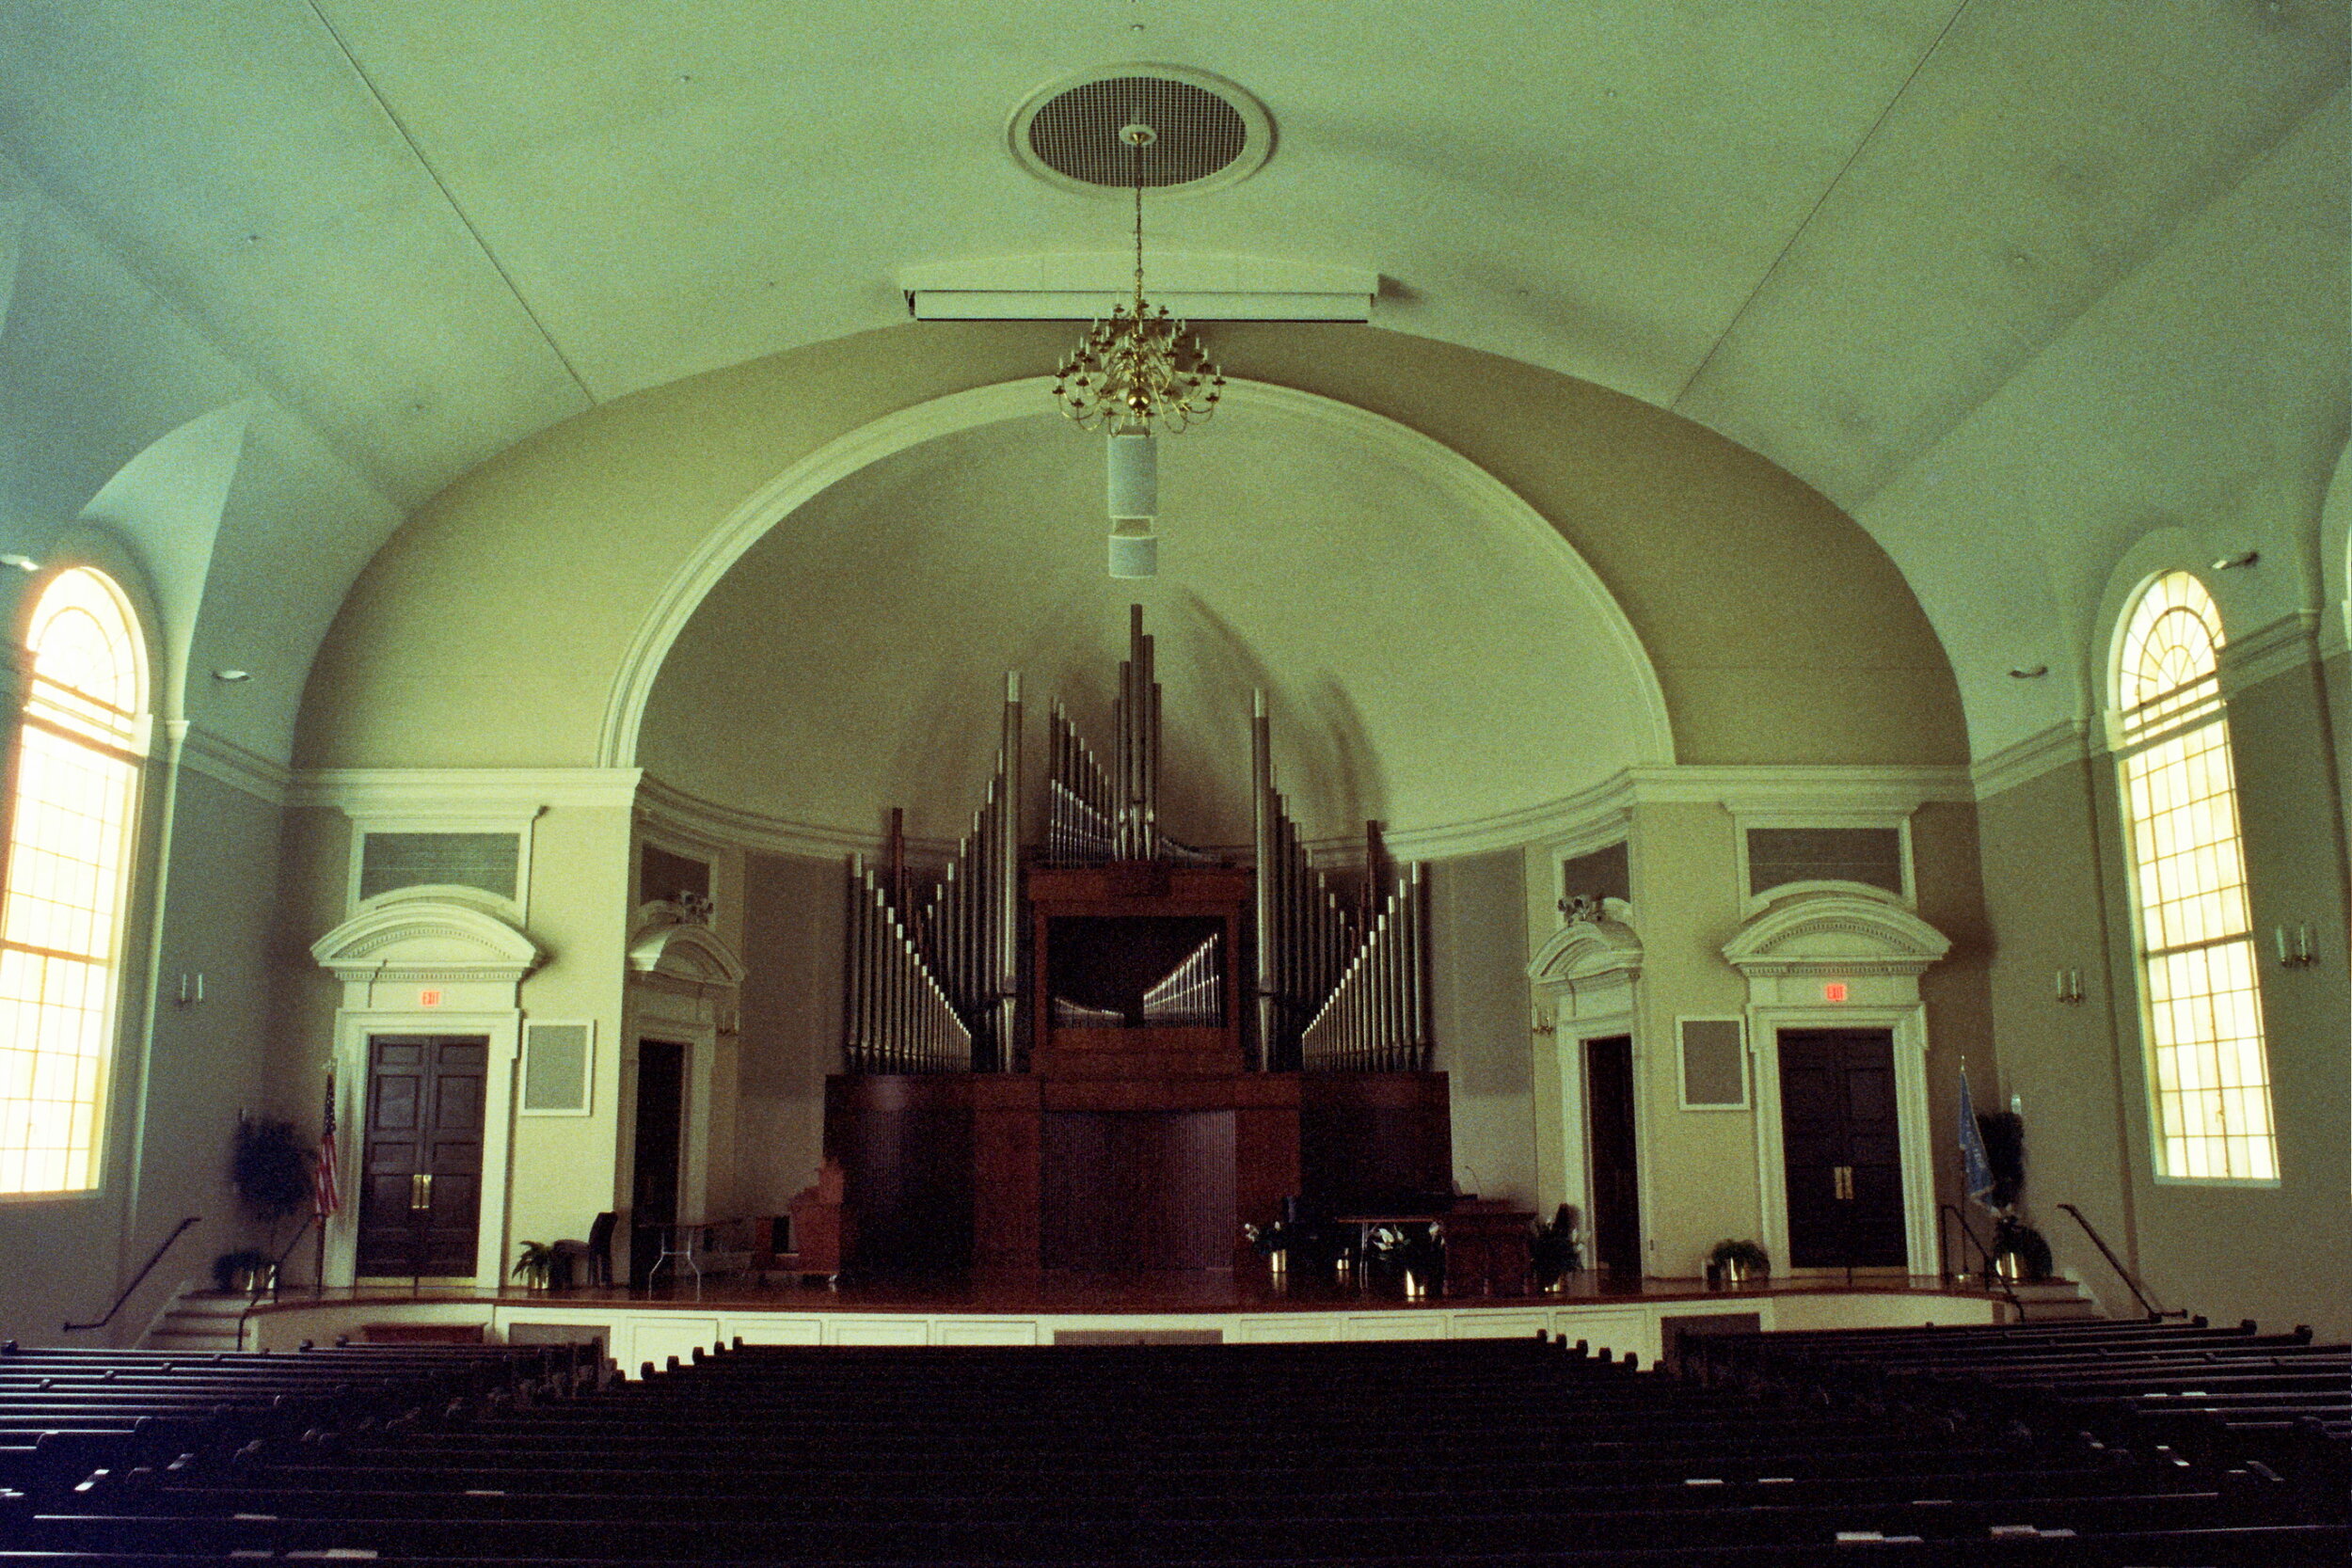 Sisters Chapel in Atlanta, Georgia. Focus is on the large organ at the center of the chapel's stage.